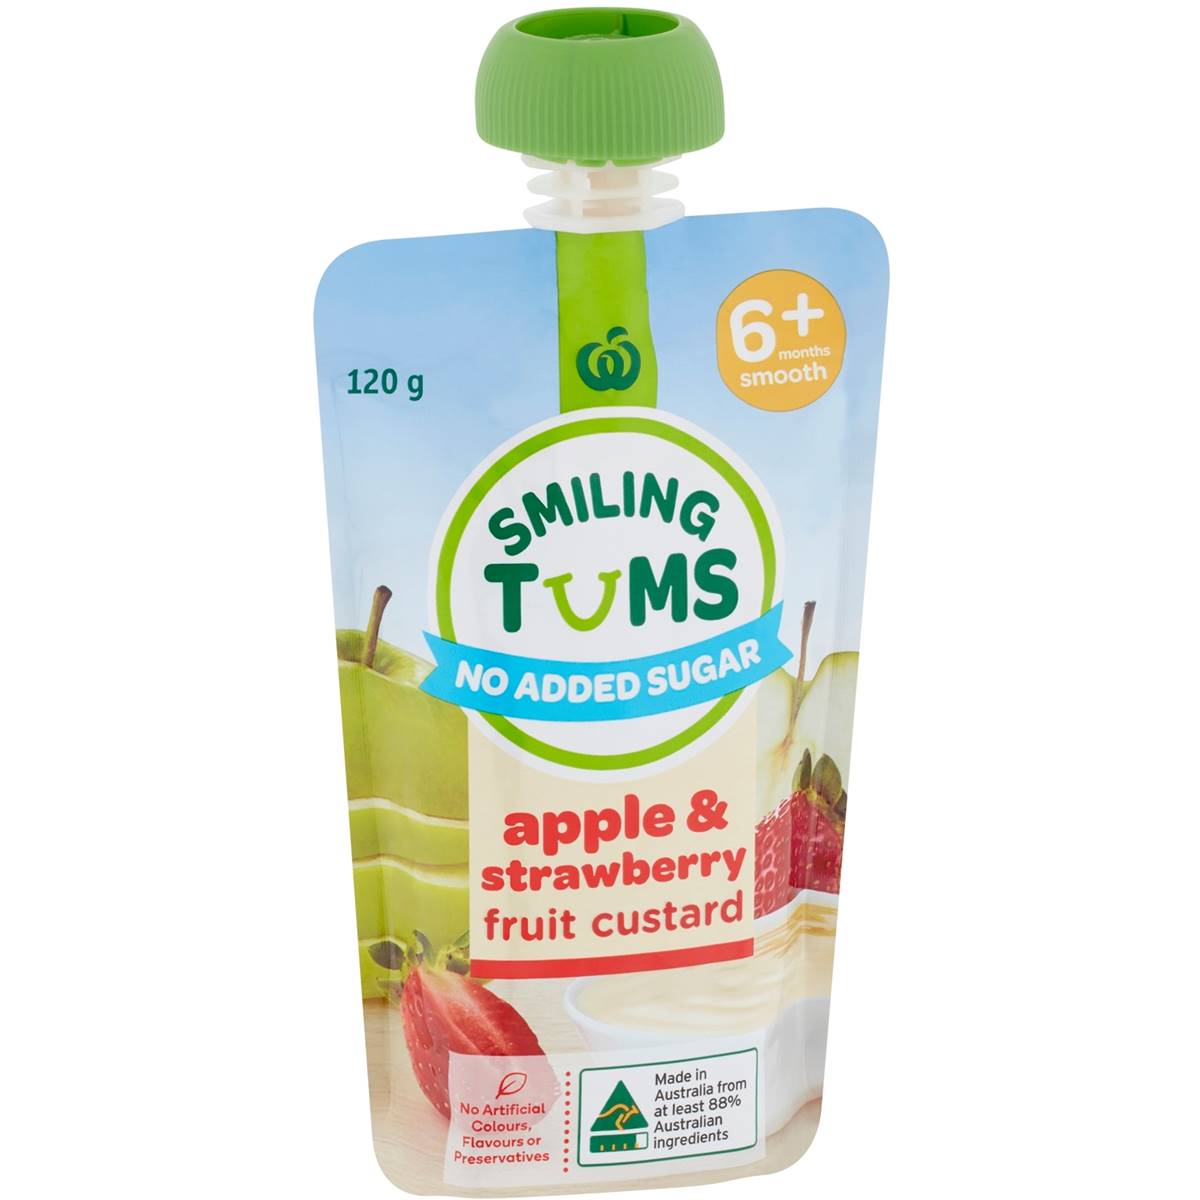 Calories in Woolworths Smiling Tums 6 Months+ Apple & Strawberry Custard